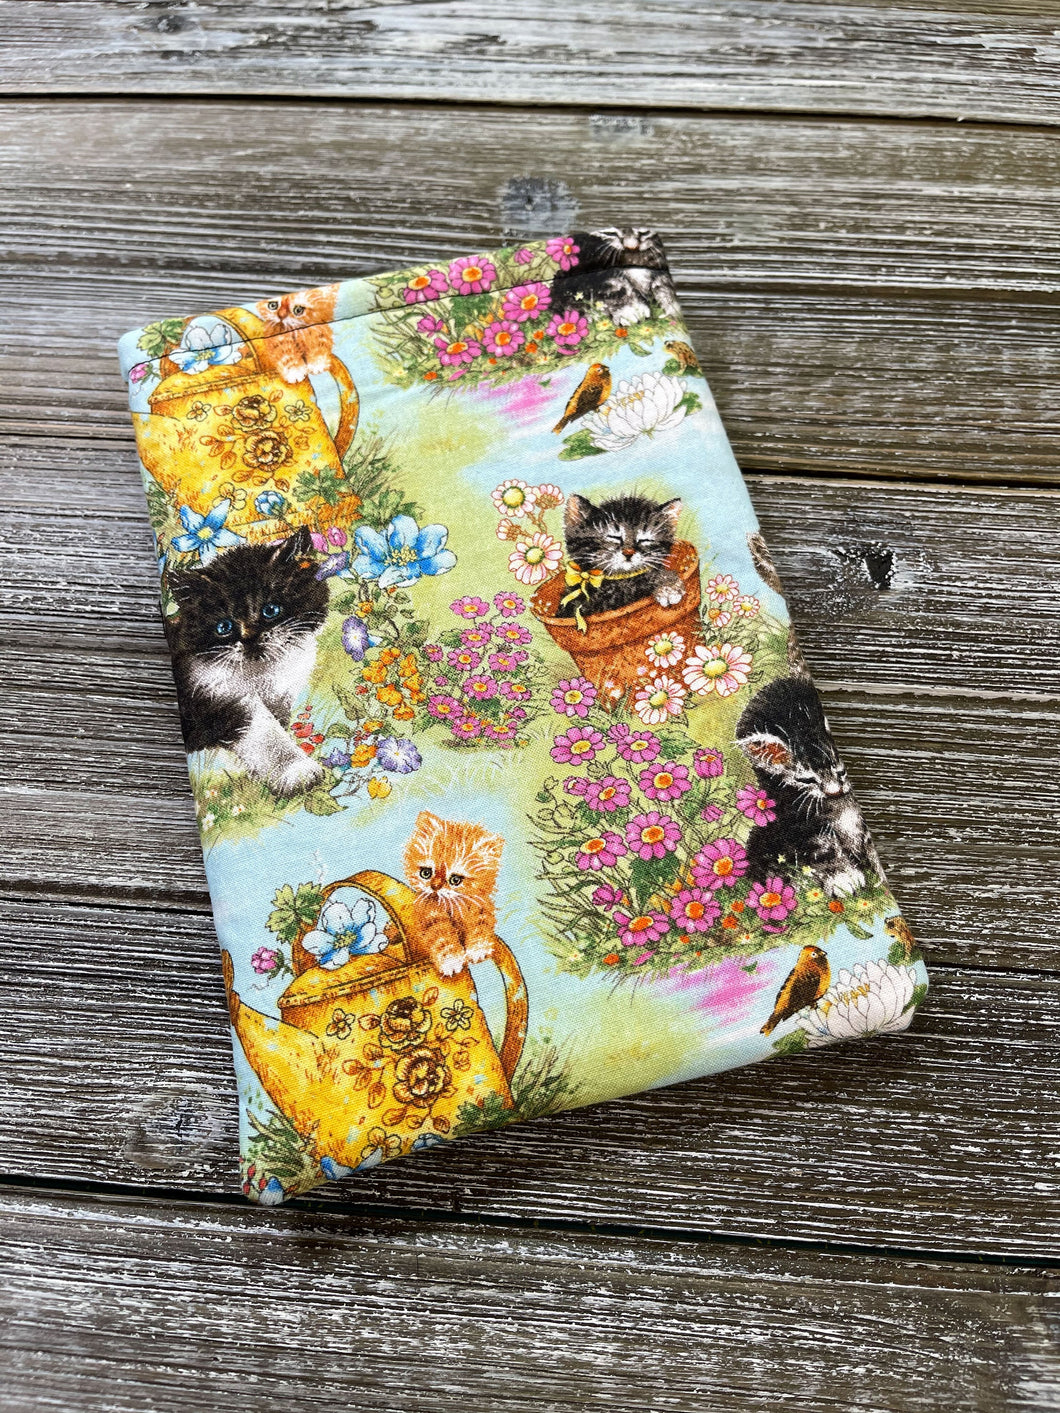 Kittens and Flowers Padded Book Sleeve | BookGoodies | Book Pocket | Protective Book Bag | Book Pouch | Bookish Nerd Gift